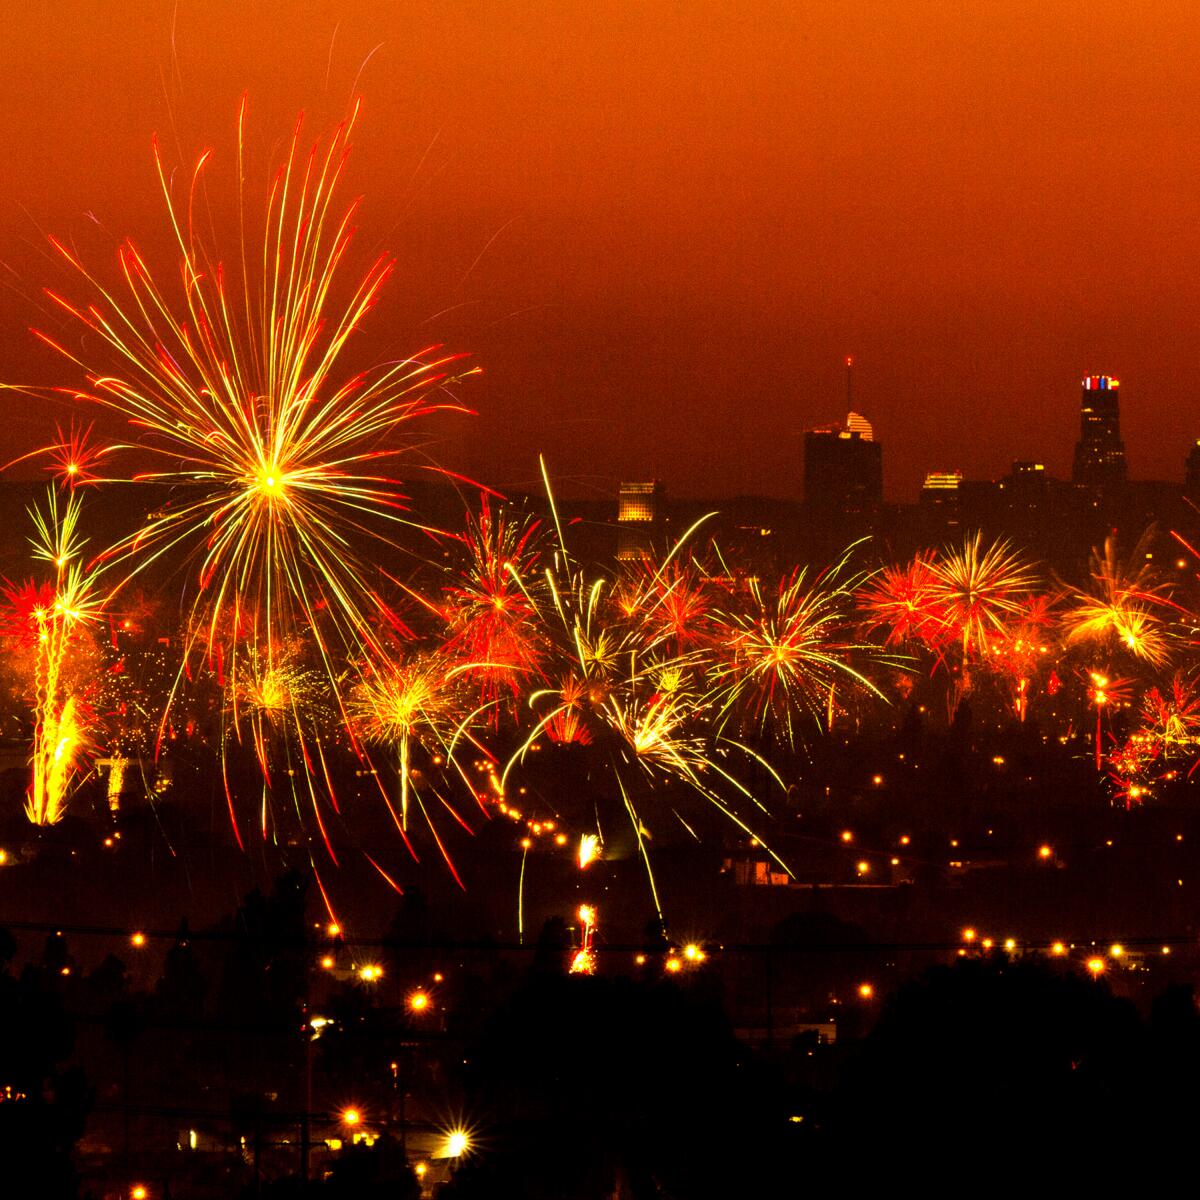  A dark Los Angeles skyline can be seen behind the exploding fireworks.